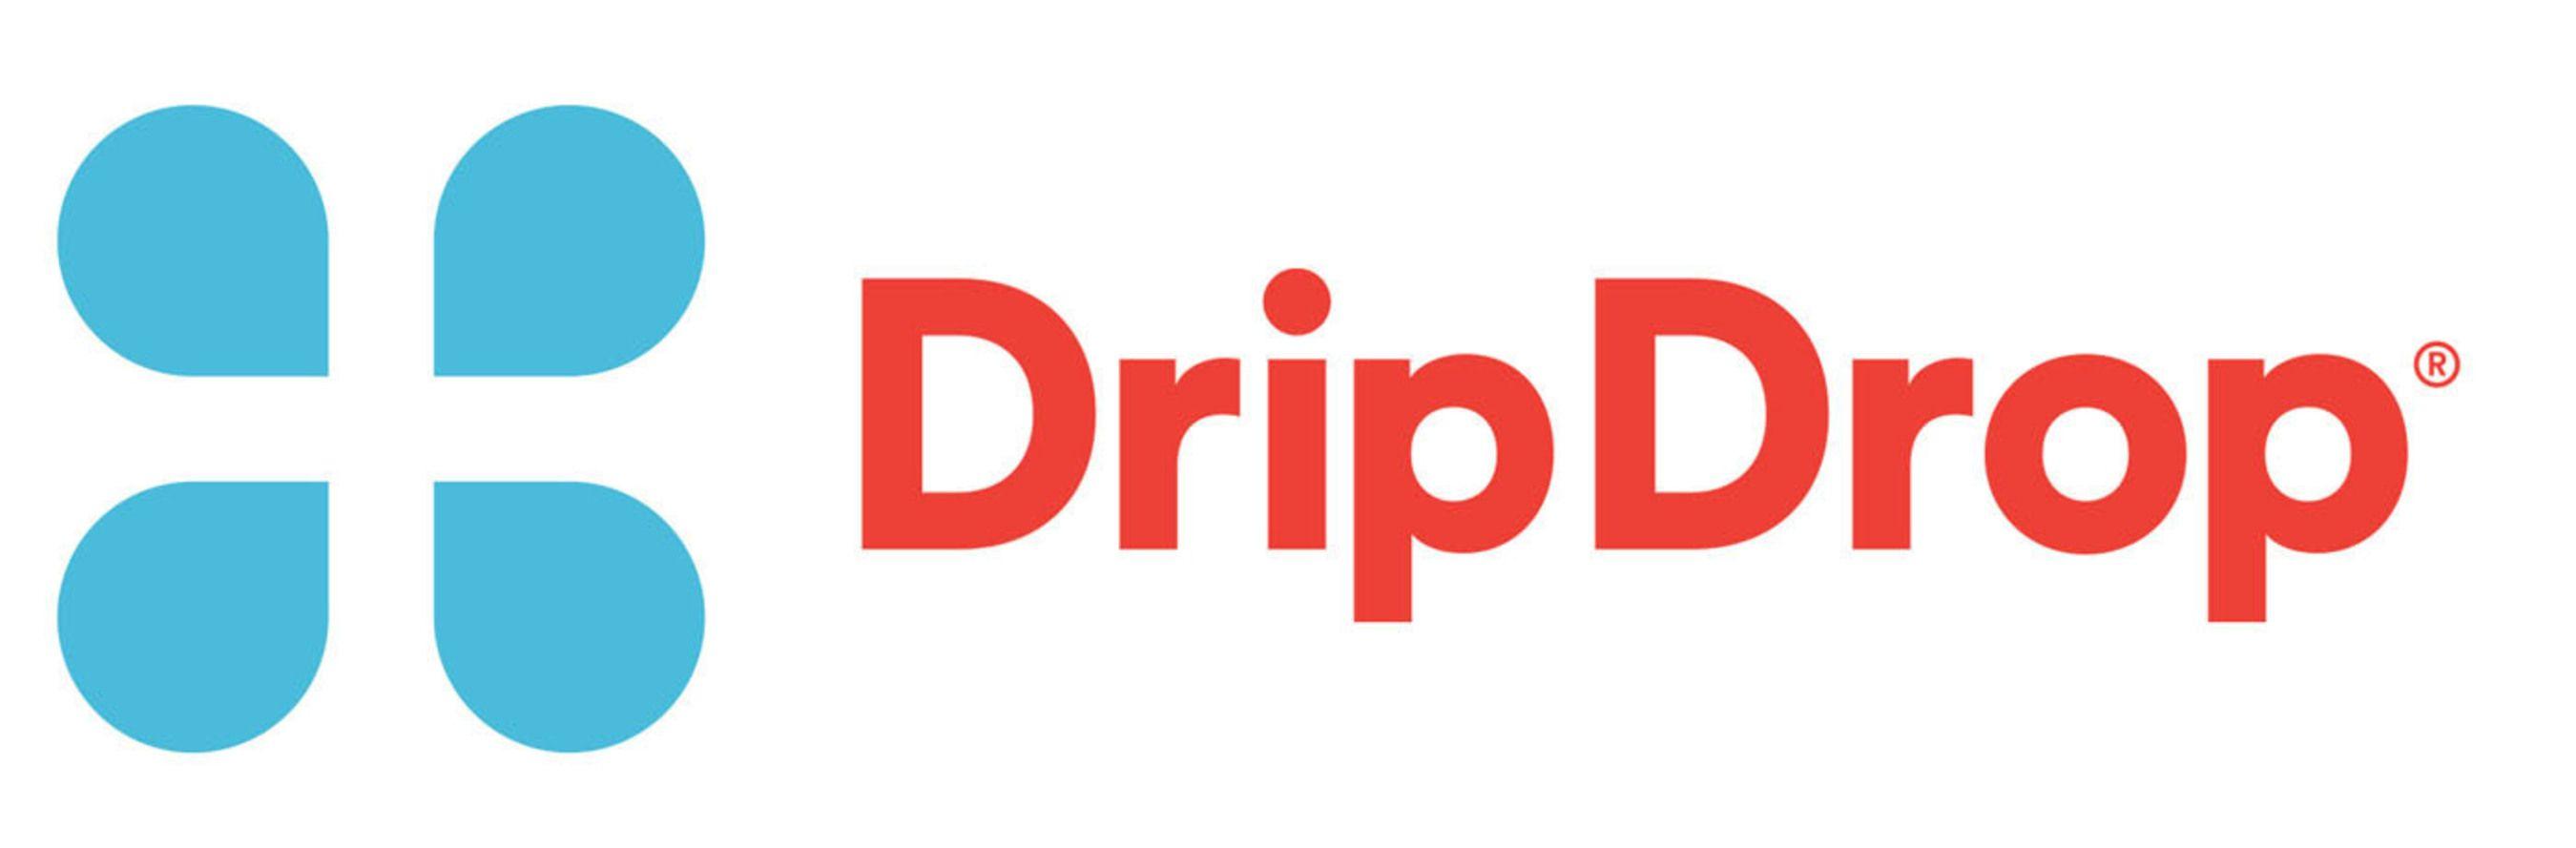 Drip Drop Logo - Drip Drop Inc. appoints Major General James Spider Marks to Board